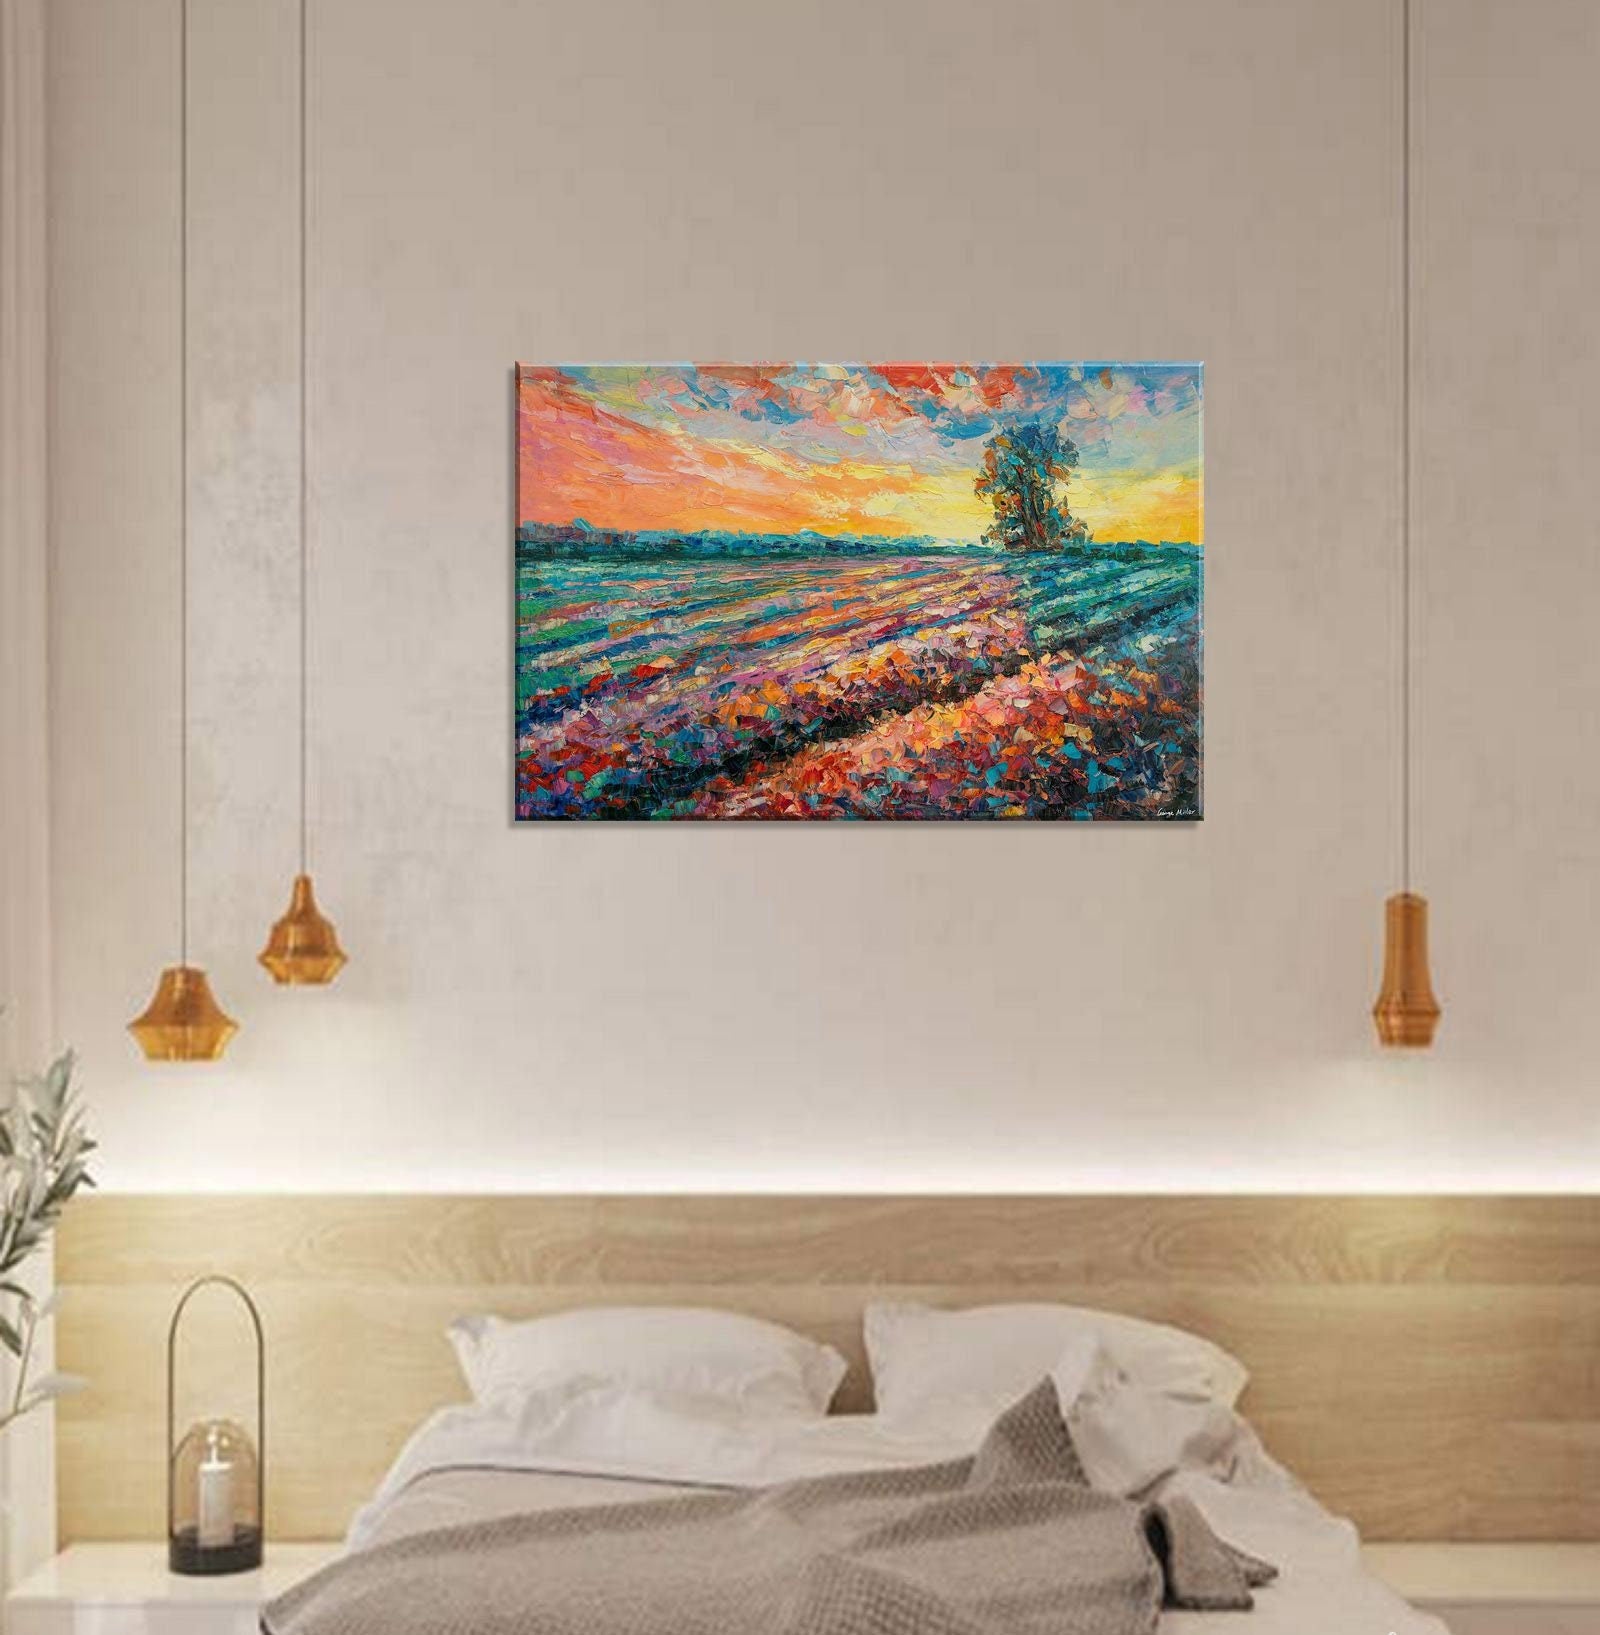 Abstract Painting, Oil Painting, Modern Art, Canvas Wall Art, Abstract Canvas Art, Original Artwork, Large Art, Abstract Landscape Painting